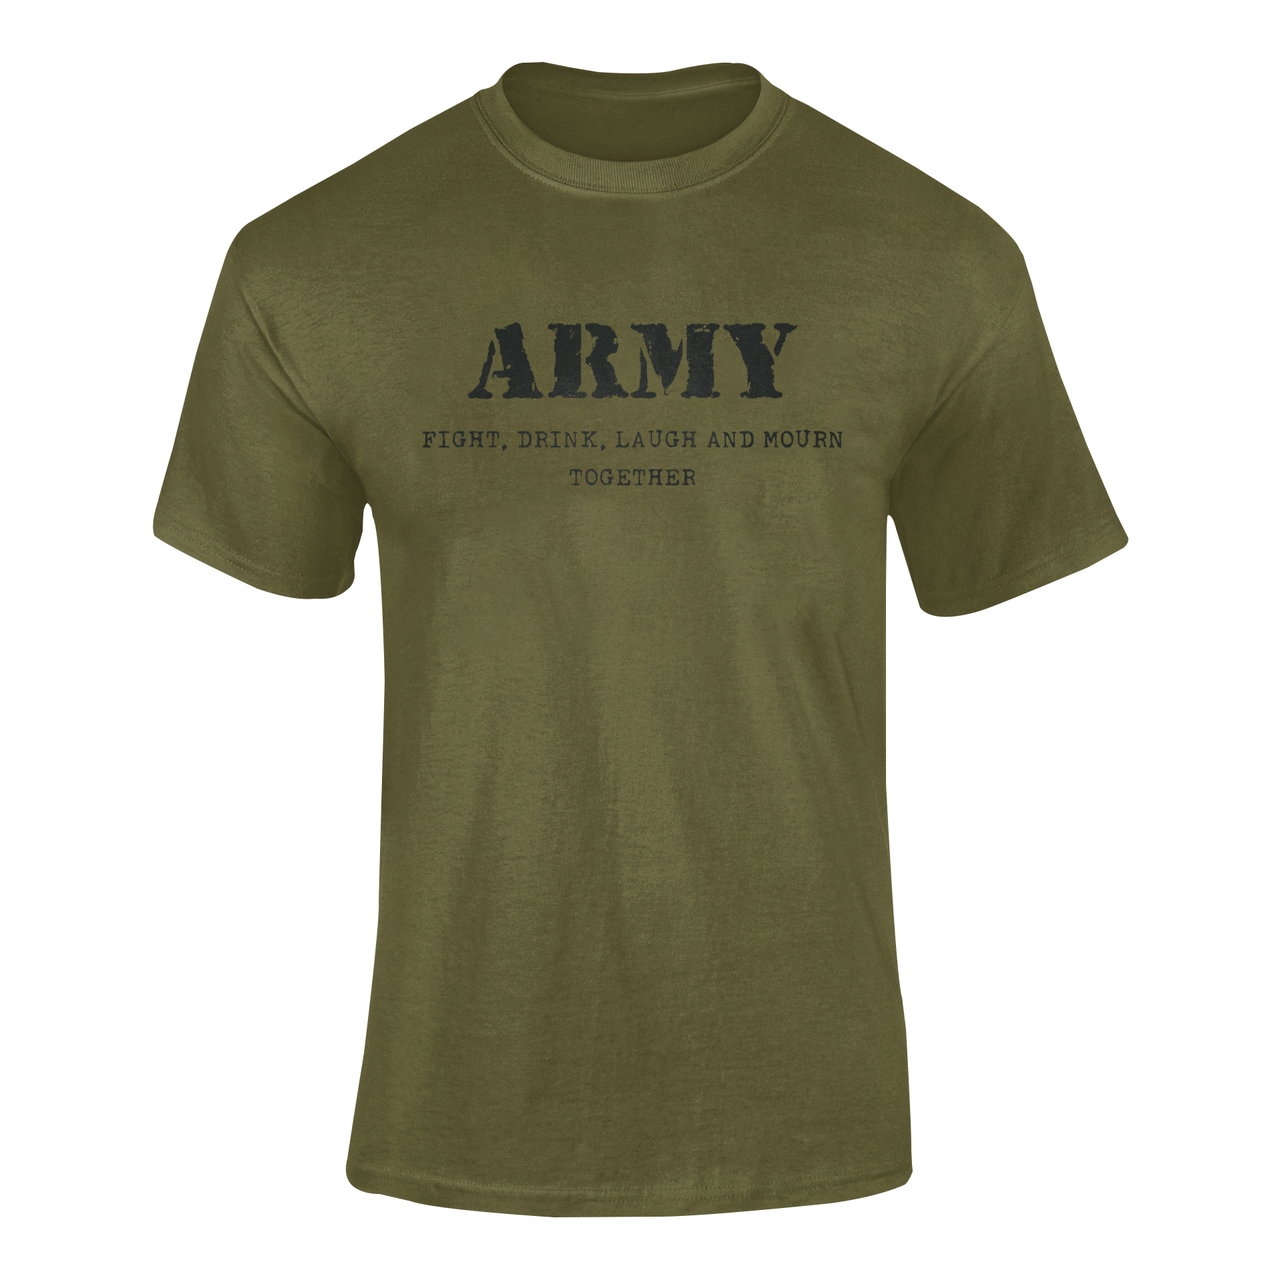 Army T-shirt - Fight, Drink, Laugh and Mourn Together (Men)